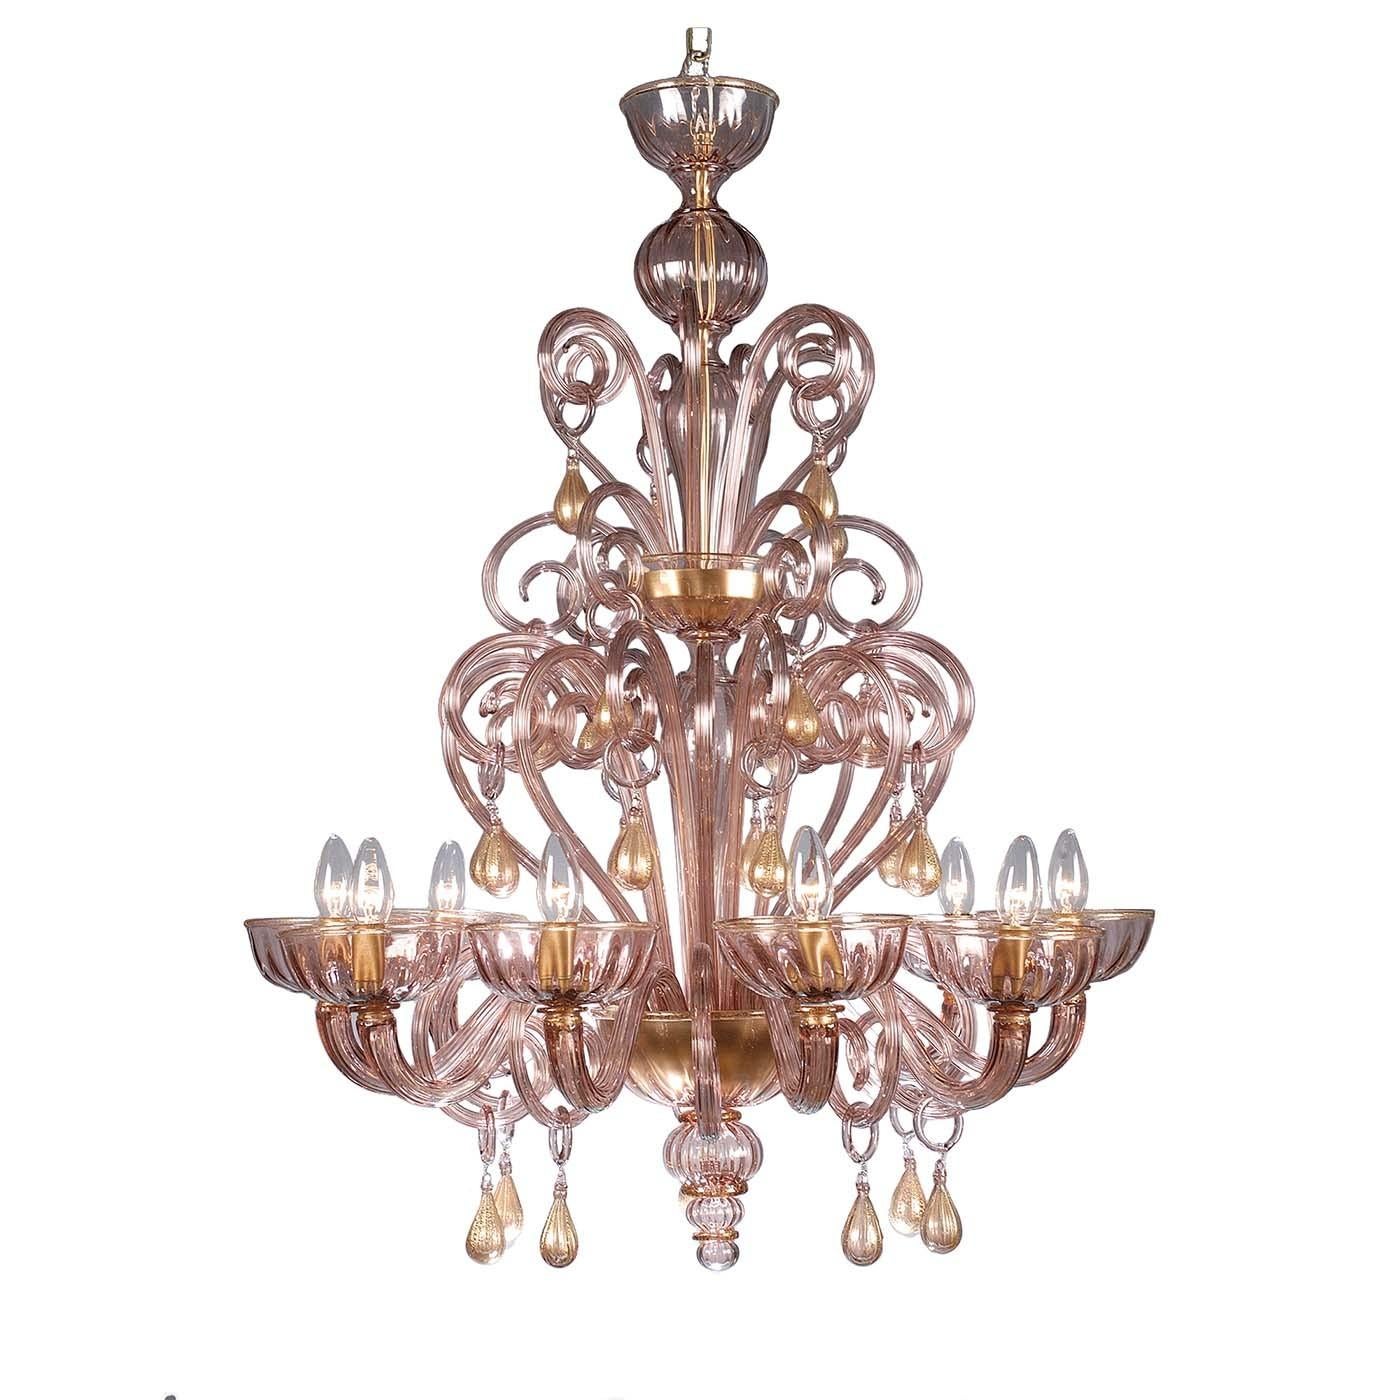 This striking Venetian chandelier is made by master glass blower Roberto Beltrami on the island of Murano in Venice. Alternating between amethyst and amber, this wonderful piece is a sophisticated addition to your decor.
 